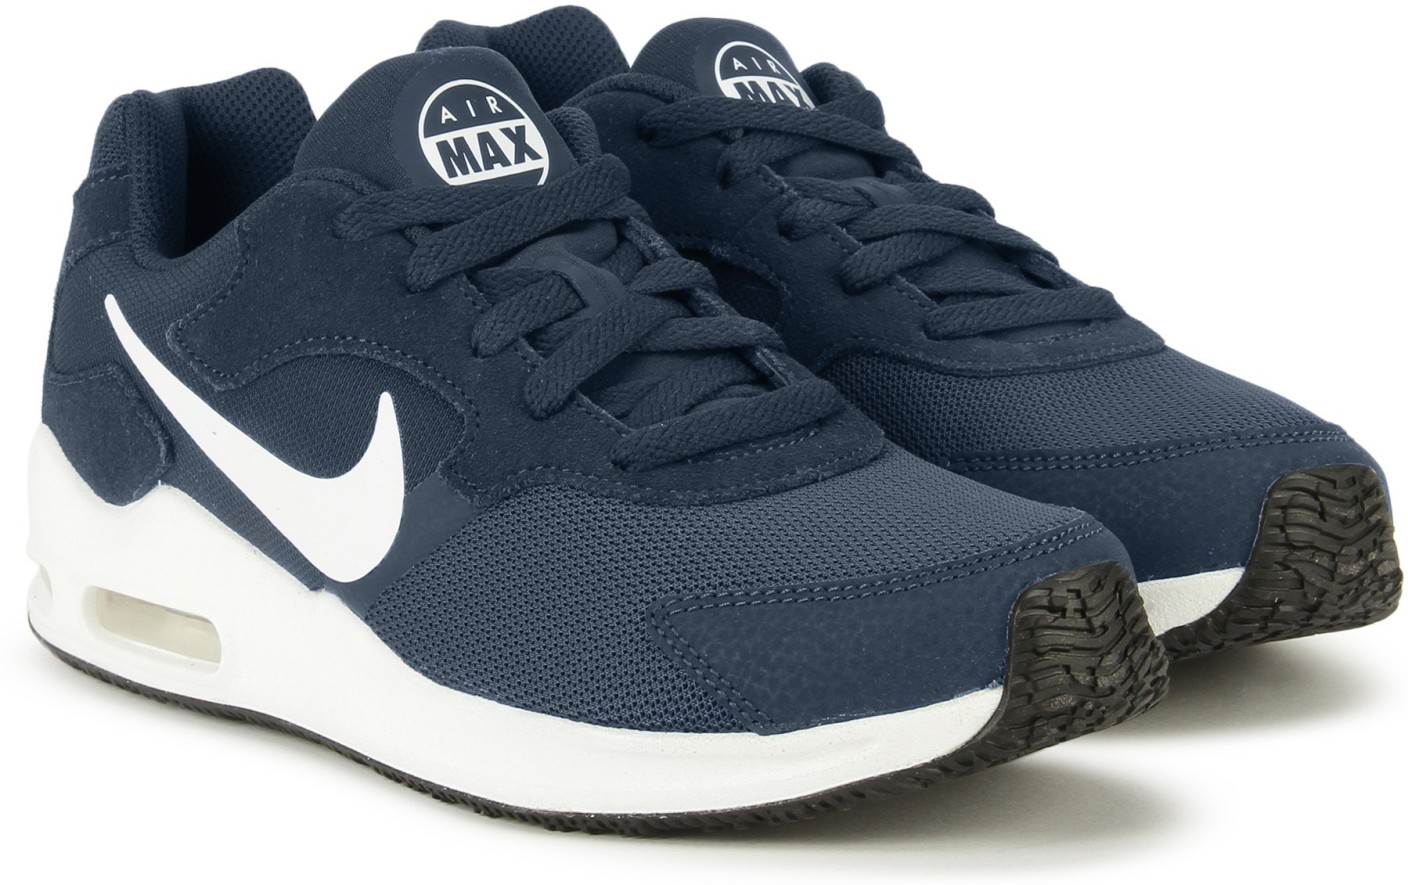 Nike AIR MAX GUILE Sneakers For Men - Buy MIDNIGHT NAVY/WHITE Color ...